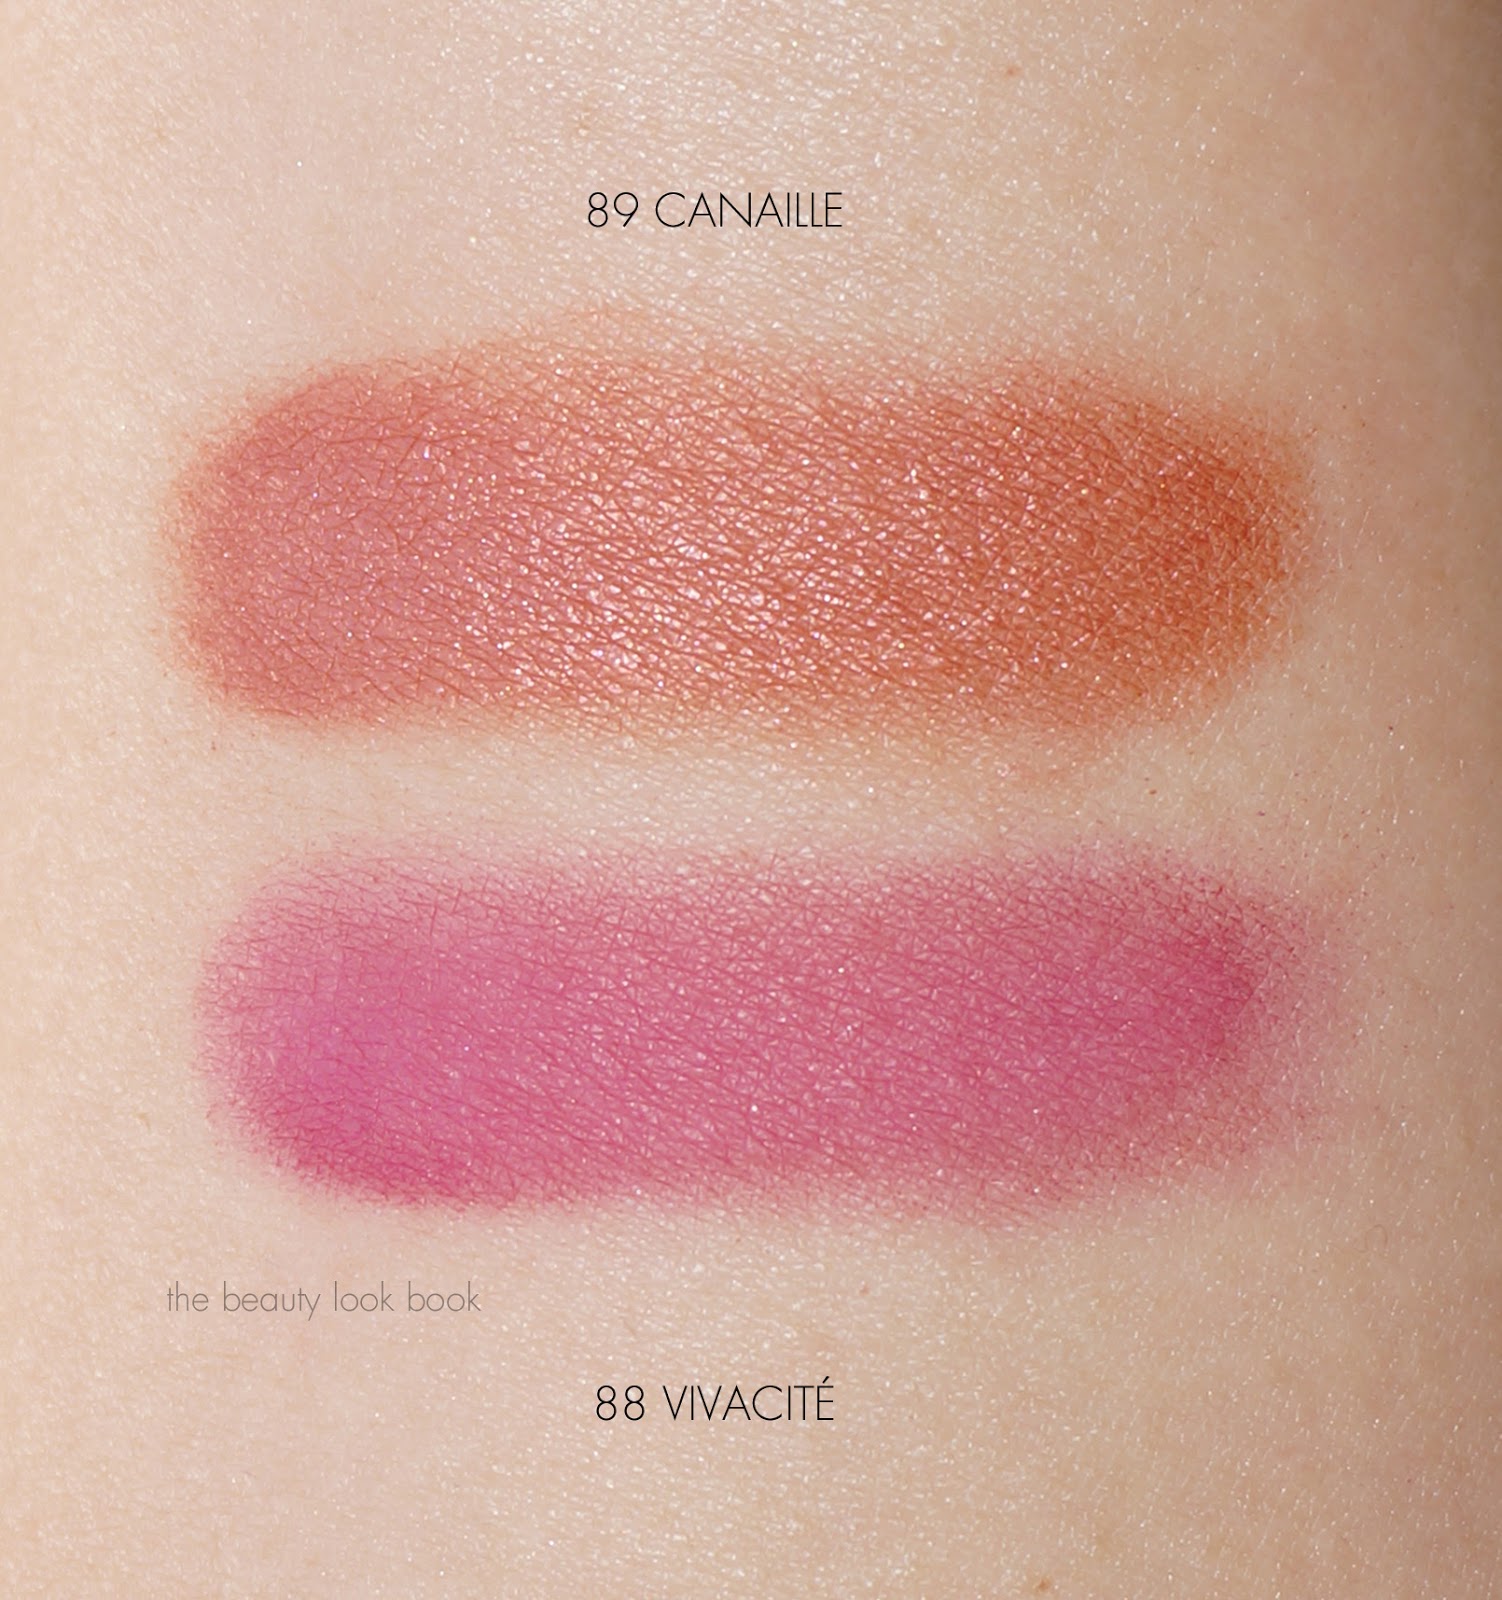 Chanel Joues Contraste Vivacité #88 and Canaille #89 - The Beauty Look Book